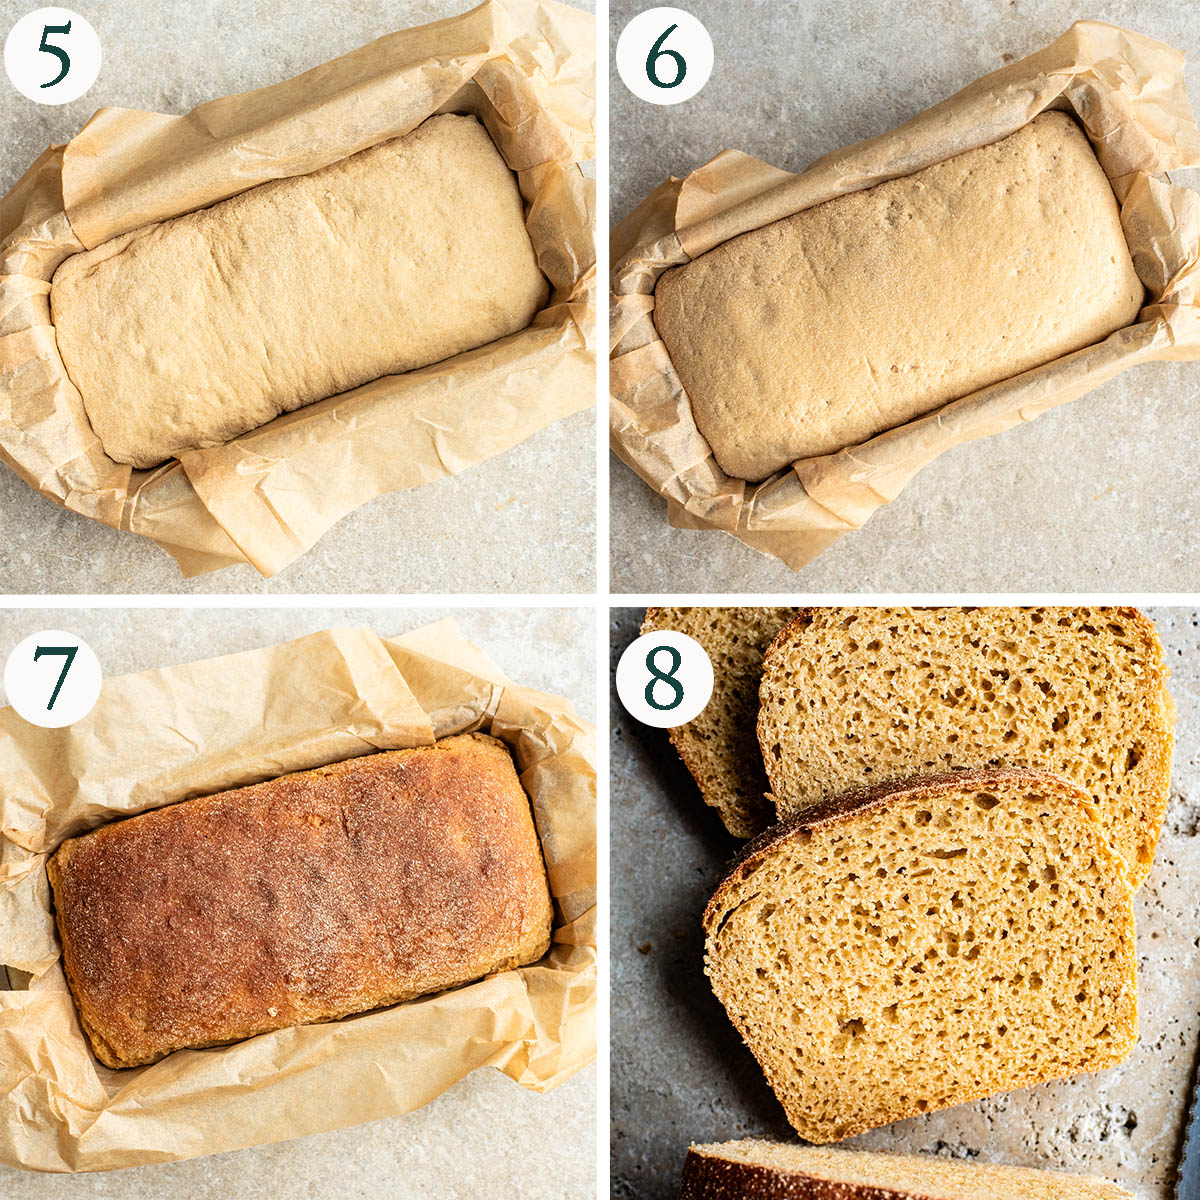 Sandwich bread steps 5 to 8, before and after rising, after baking, and sliced.